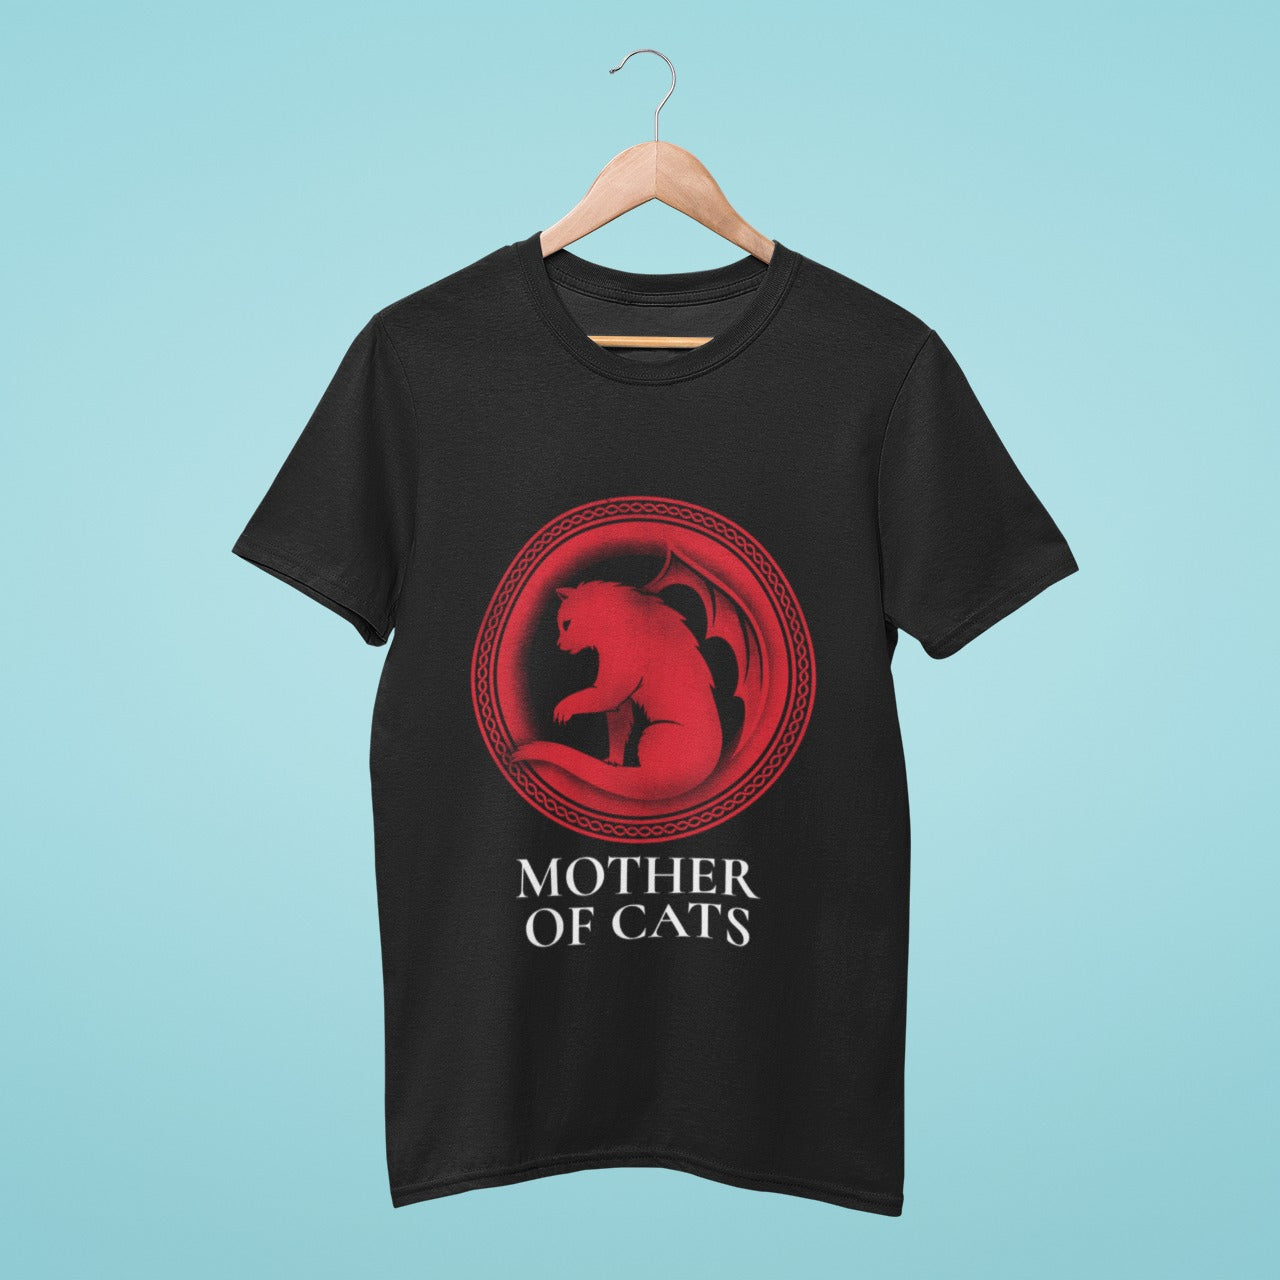 Our black "Mother of Cats" t-shirt is a must-have for cat lovers! Featuring a circular design of a red-colored cat with dragon wings resembling the Game of Thrones logo, this high-quality cotton t-shirt is perfect for any casual occasion.